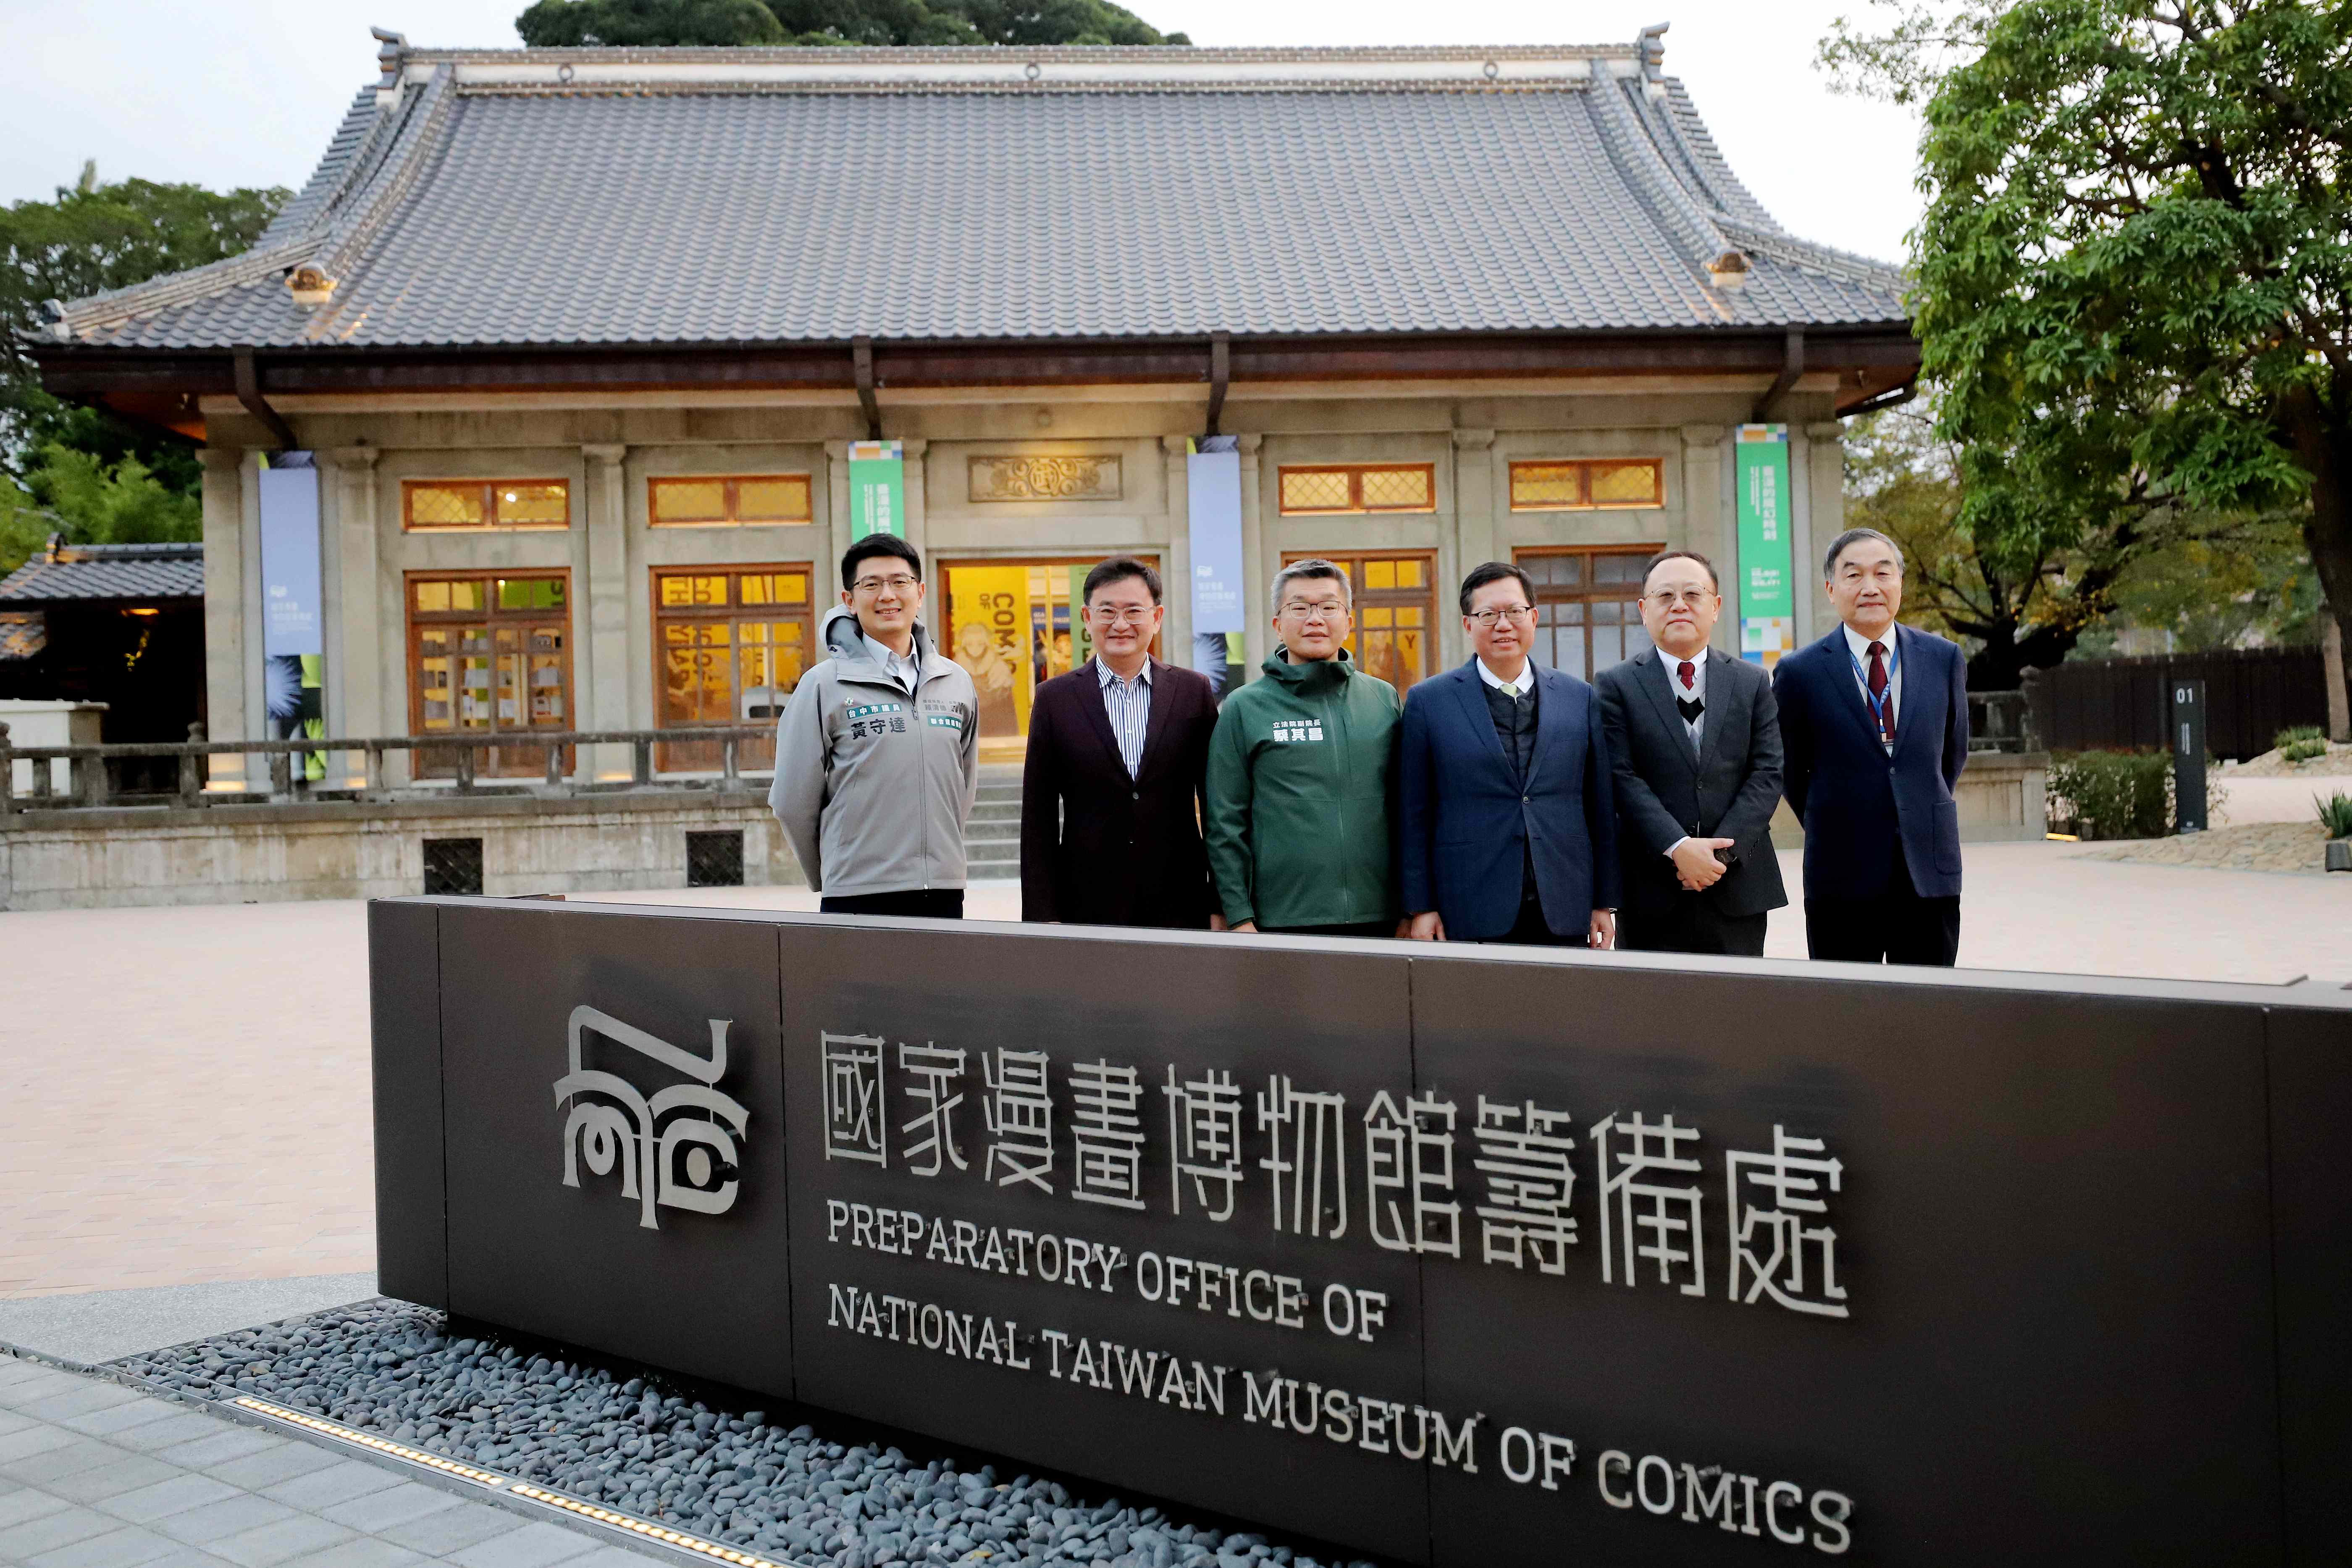 National Taiwan Museum of Comics partially opens in late December